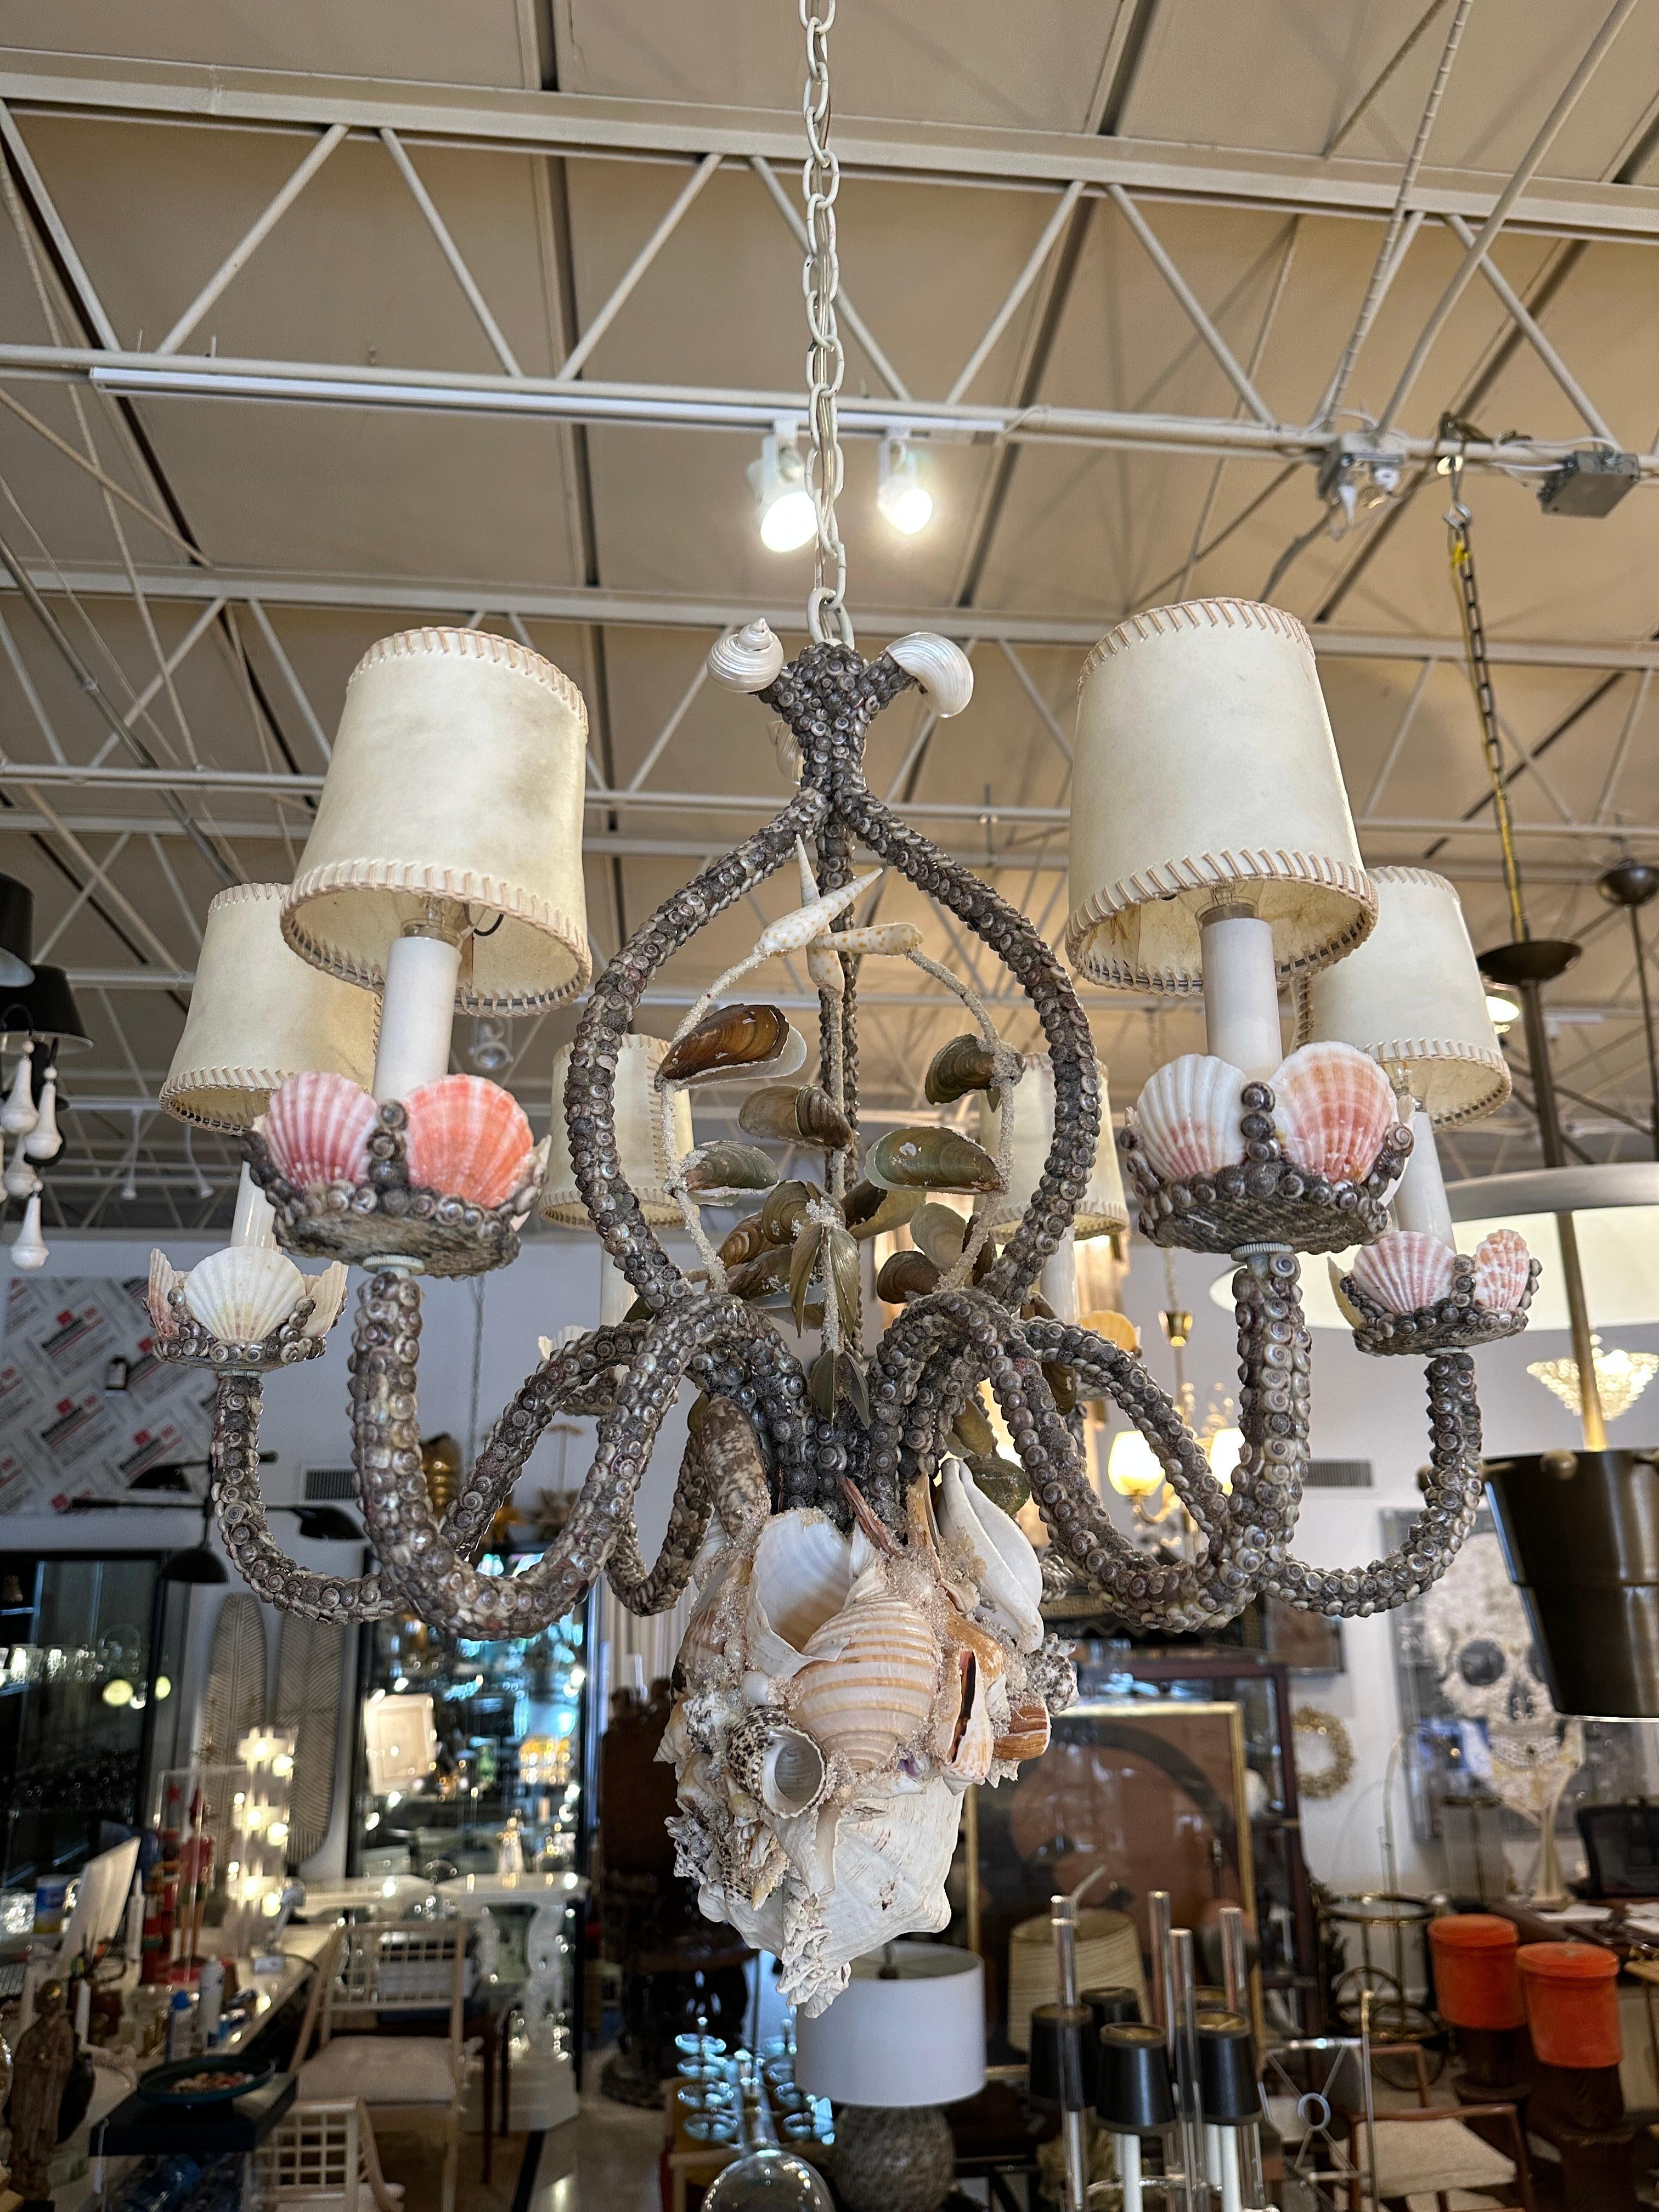 This 6-Arm Palm Beach beauty is completely encrusted with 100% natural seashells of all sorts. A gorgeous conch shell to bottom finial and ORIGINAL vintage parchment shades included. Also features original shell covered canopy.

NOTE: 66 inches